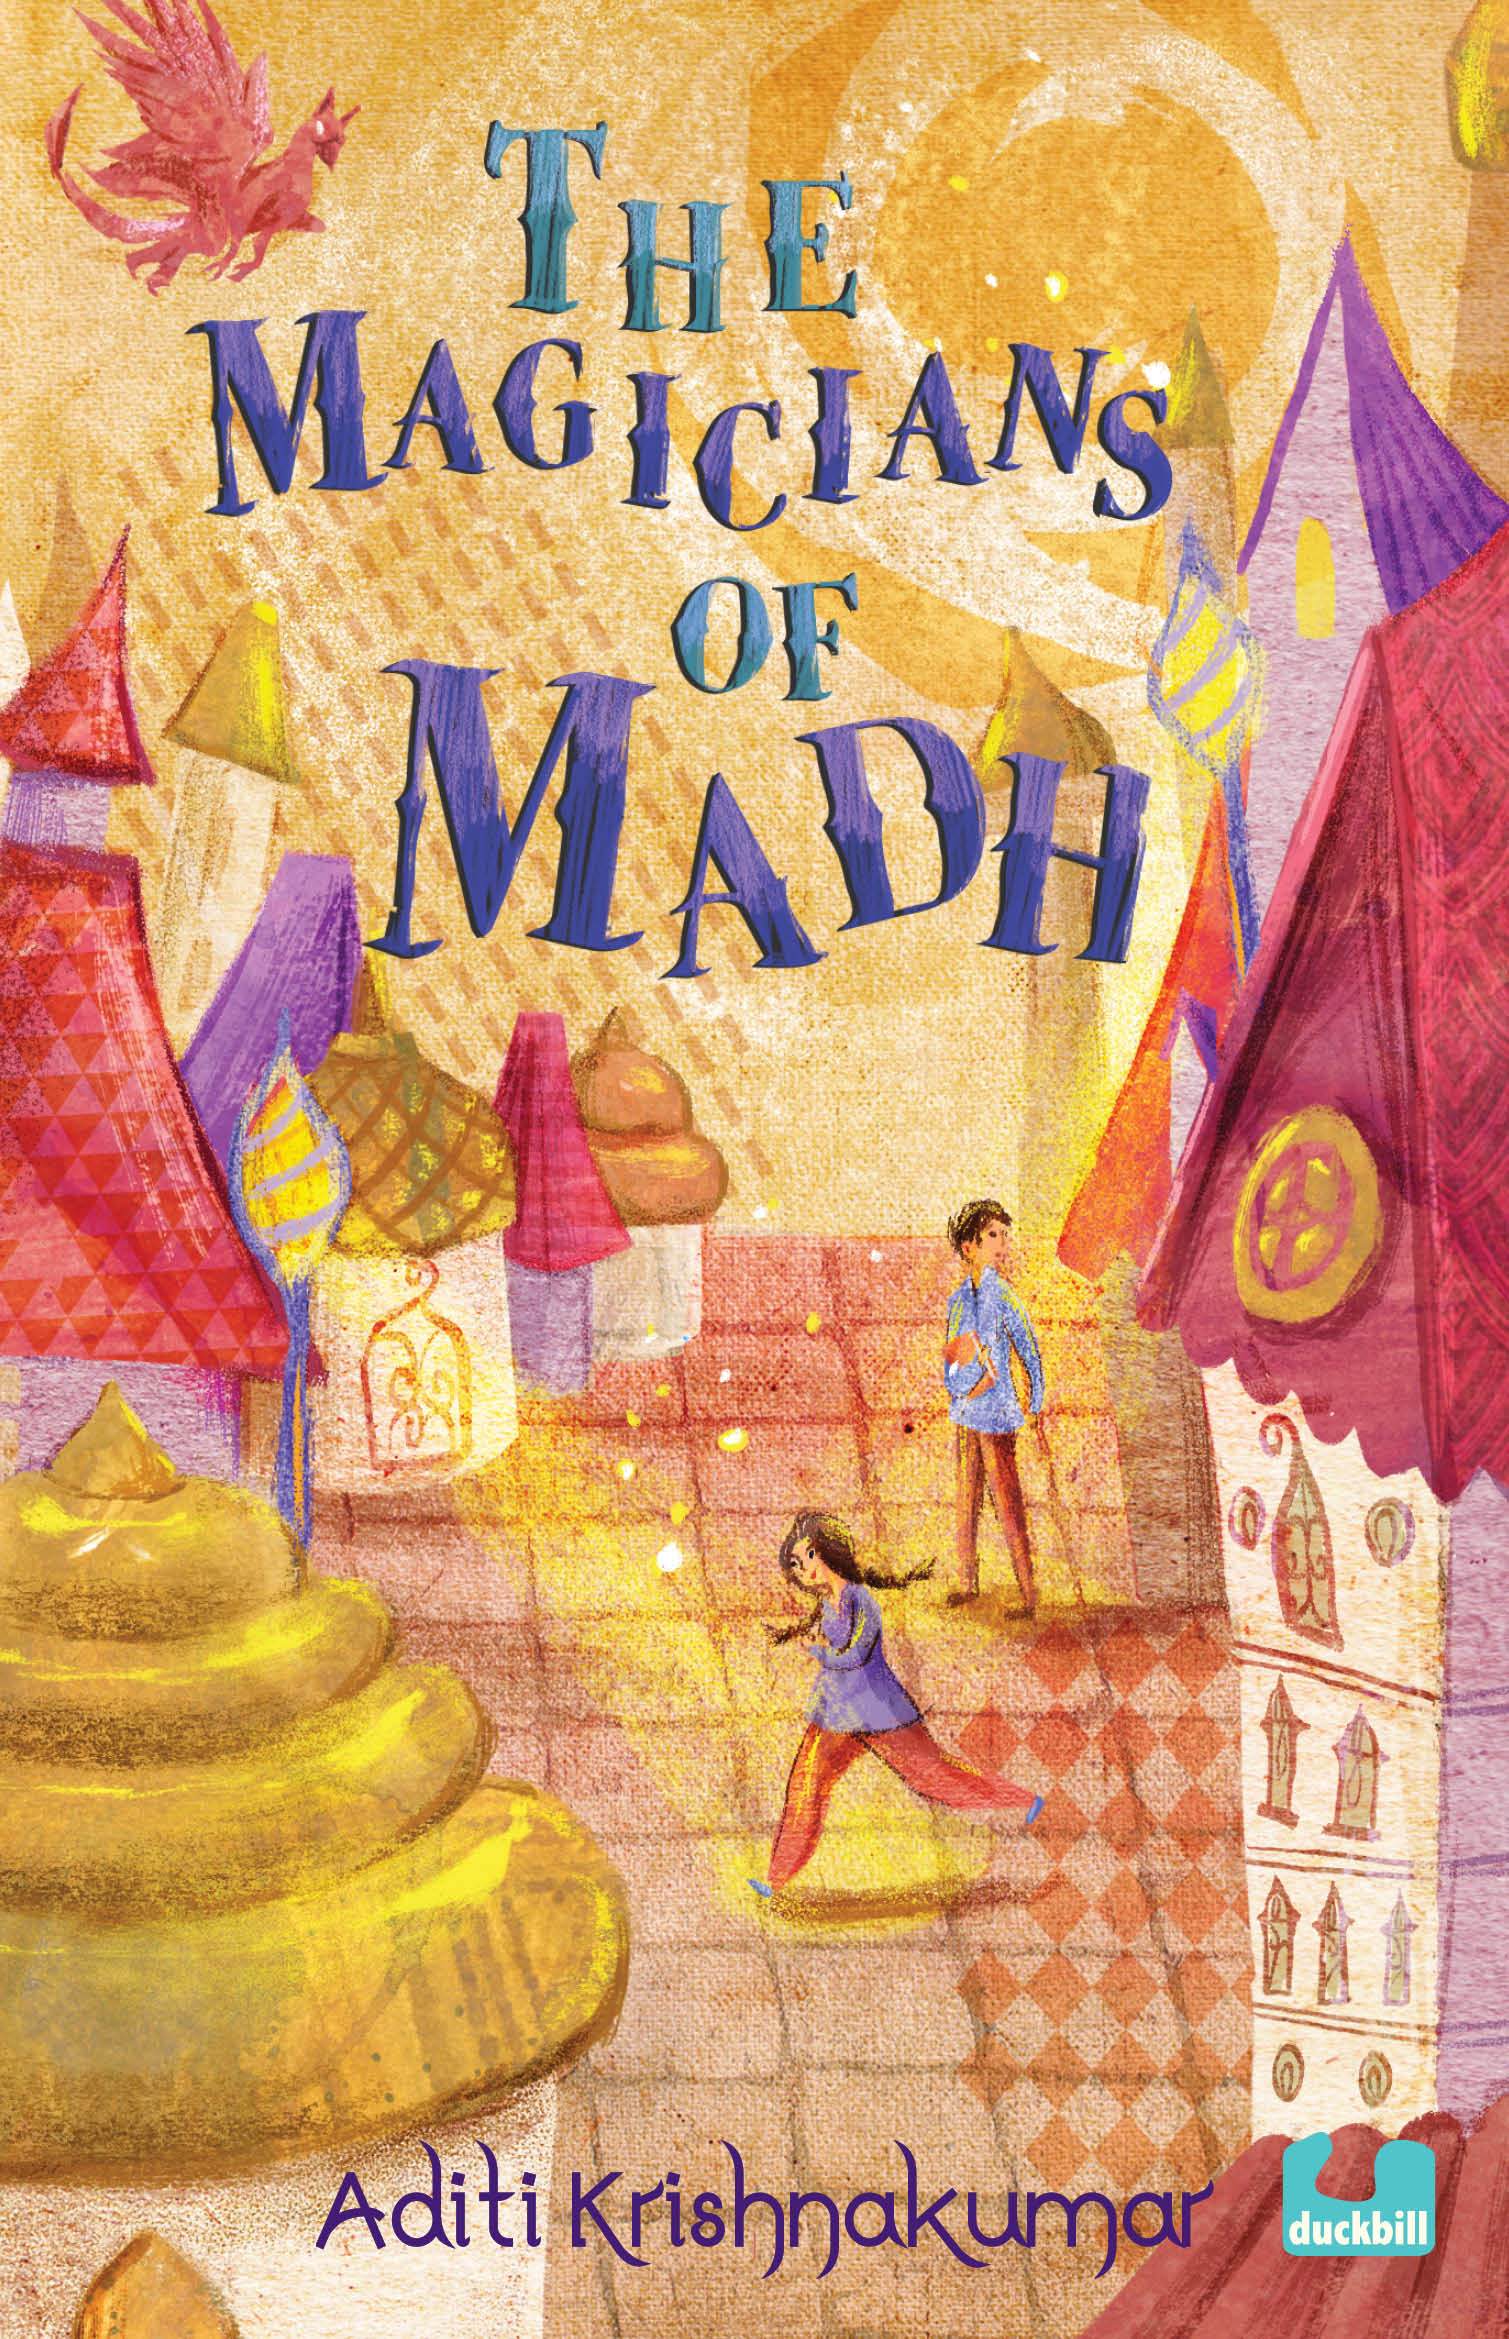 Read more about the article The Magicians of Madh delves into some delightful fantasy fiction